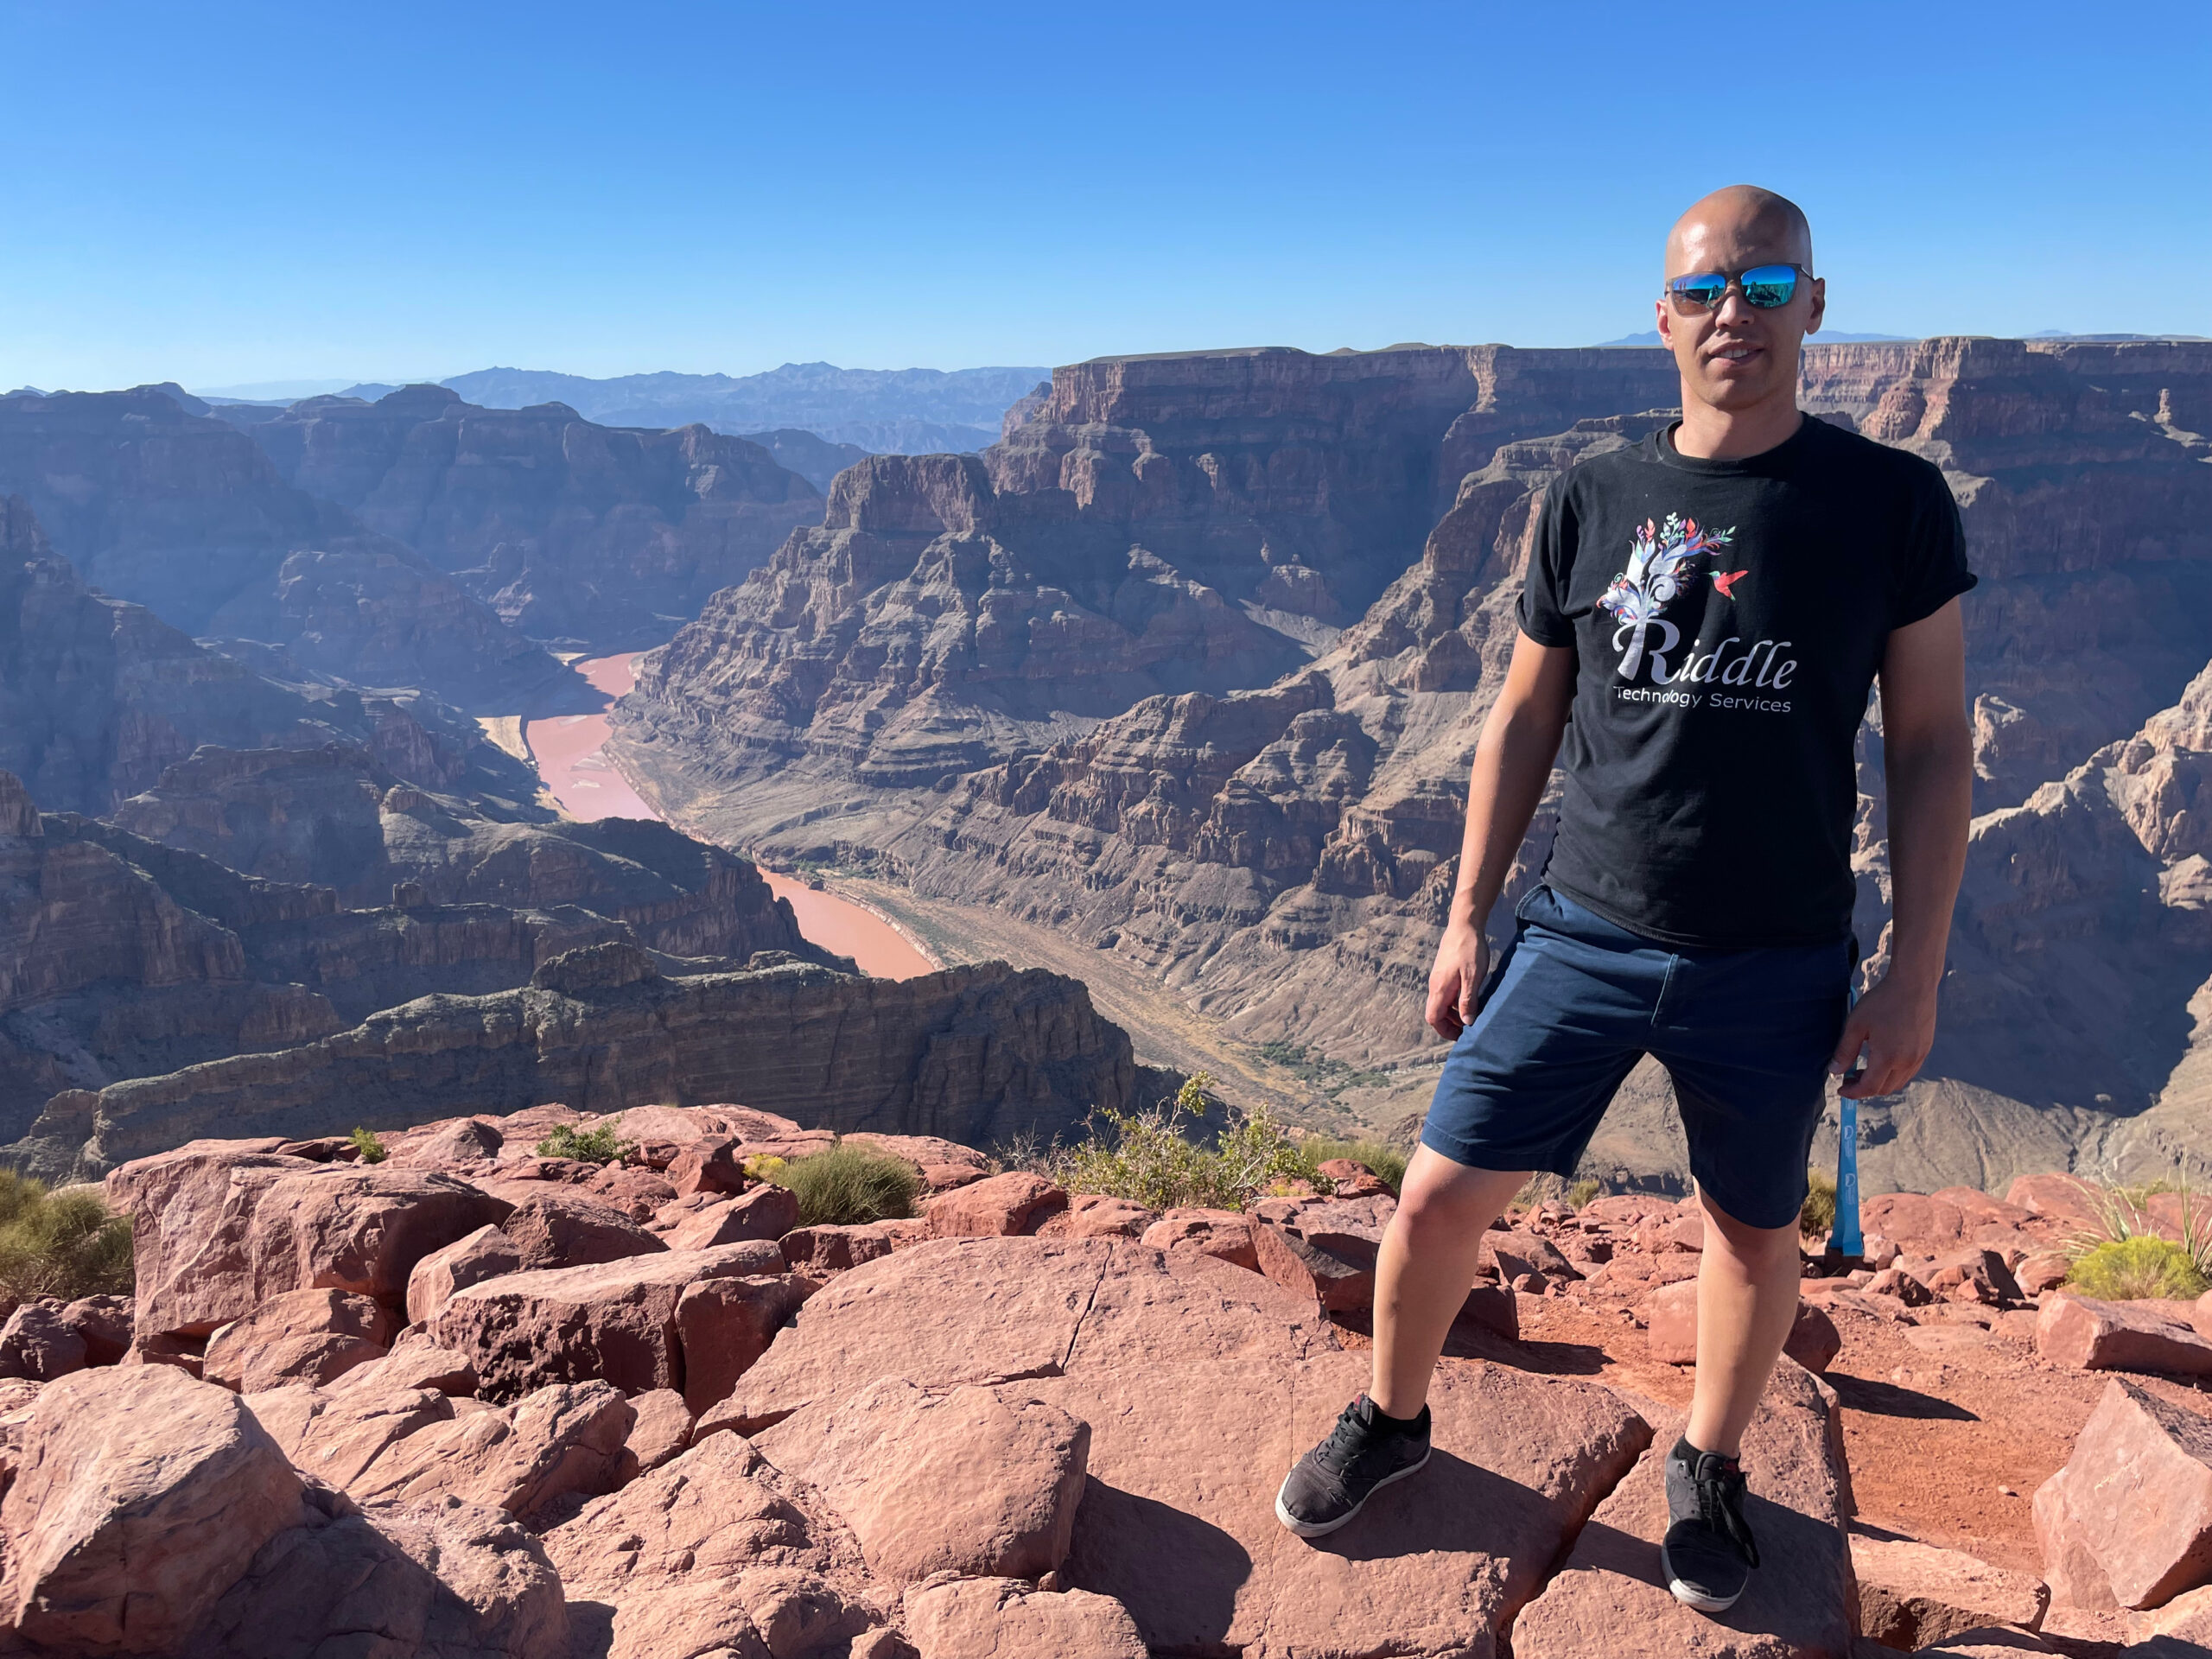 Owner Will at the Grand Canyon